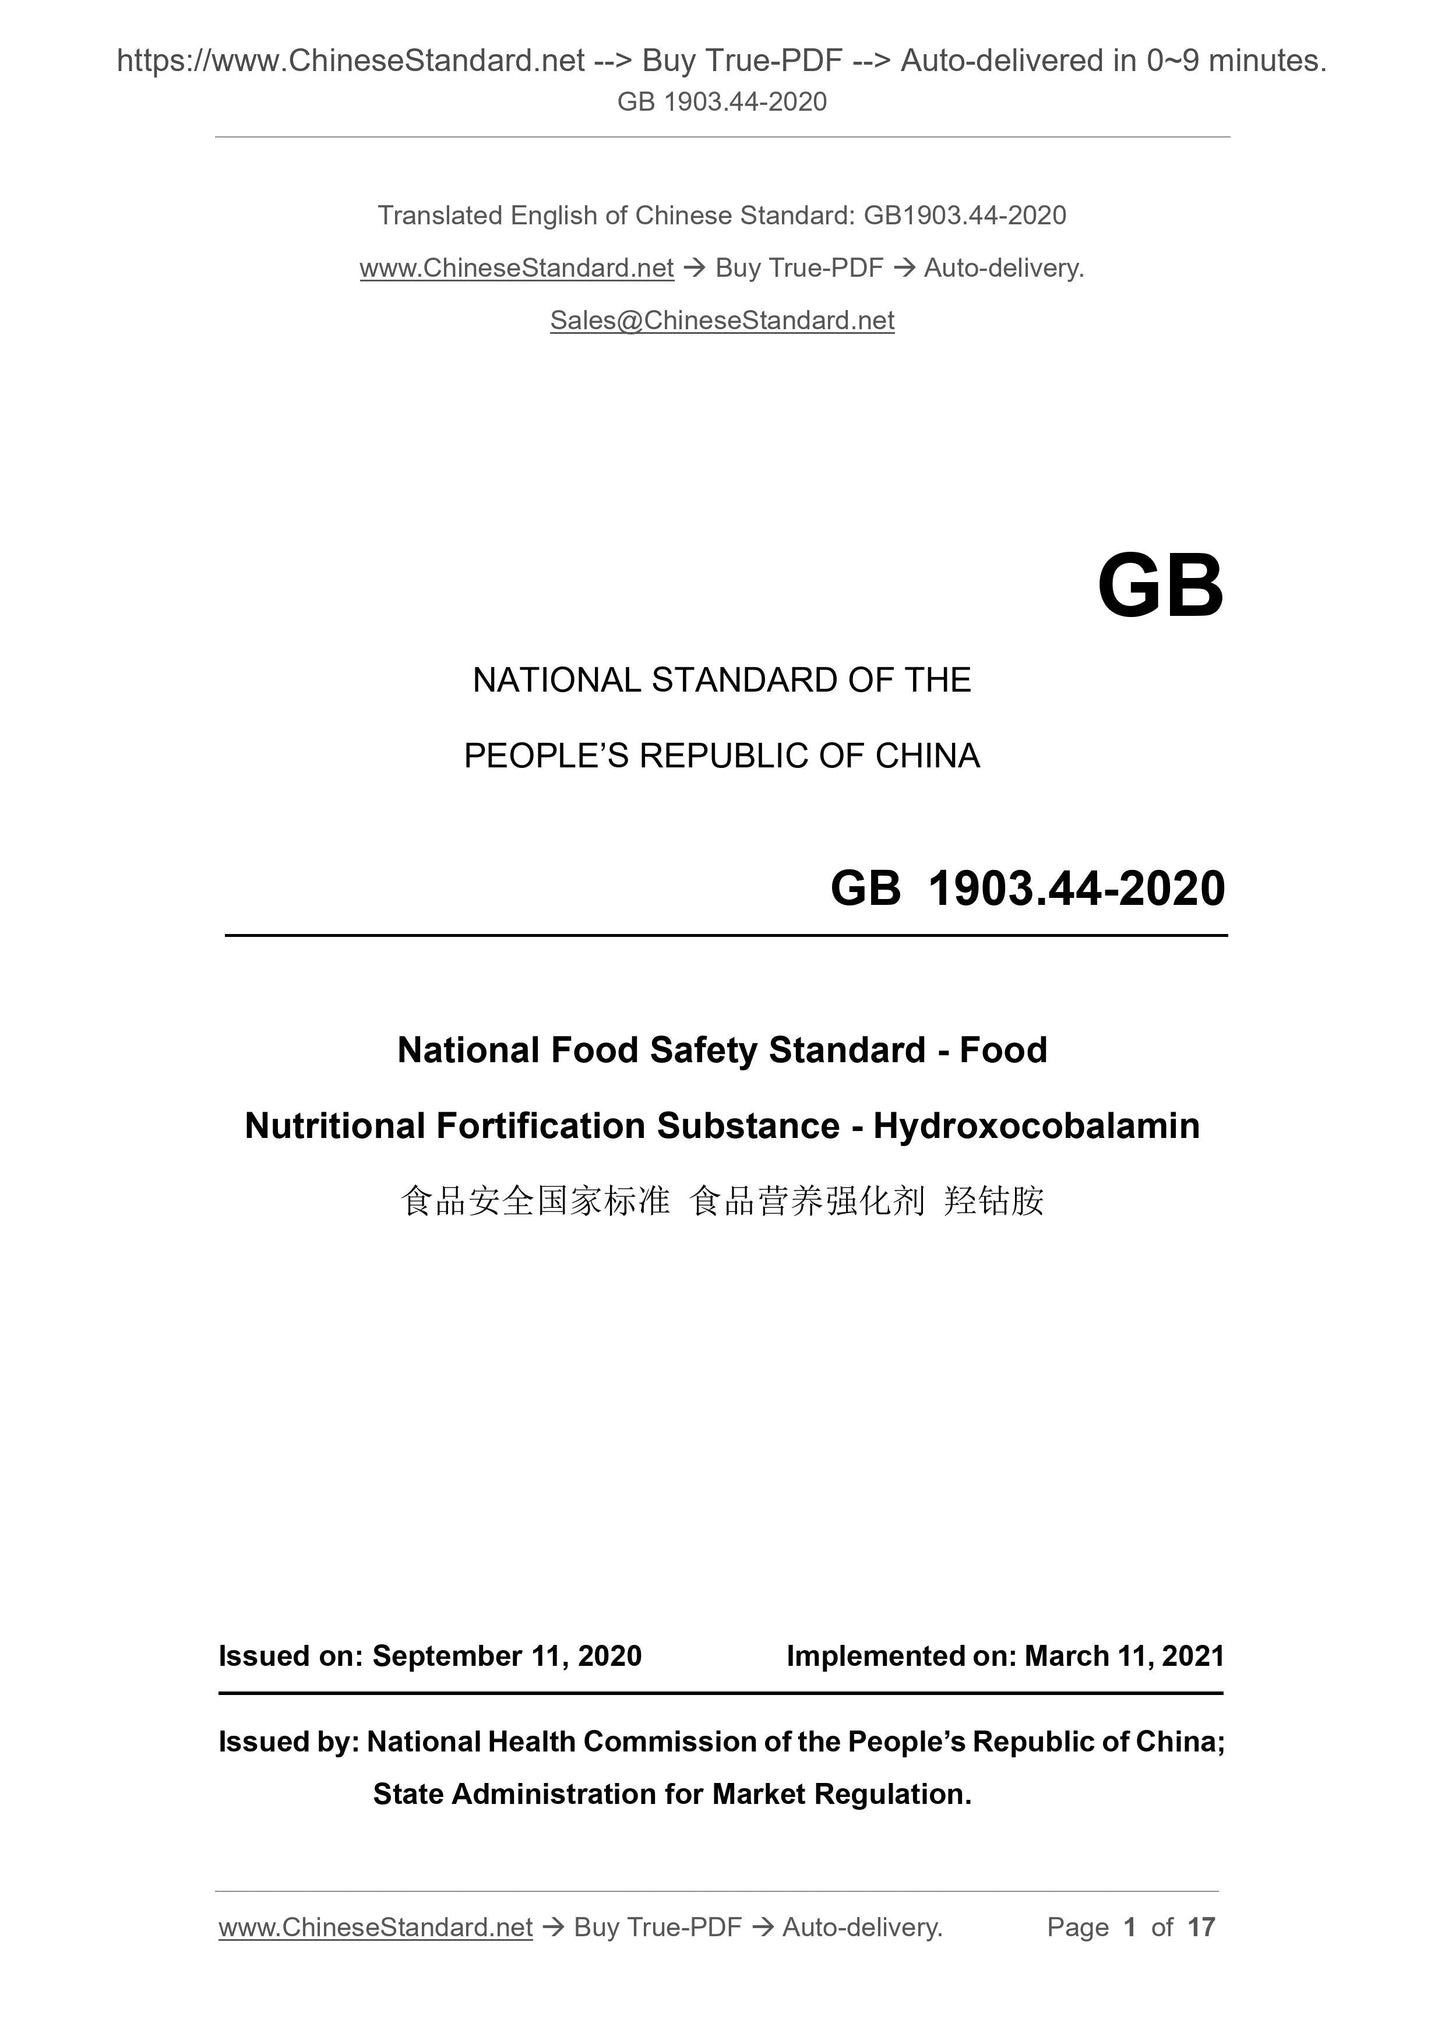 GB 1903.44-2020 Page 1